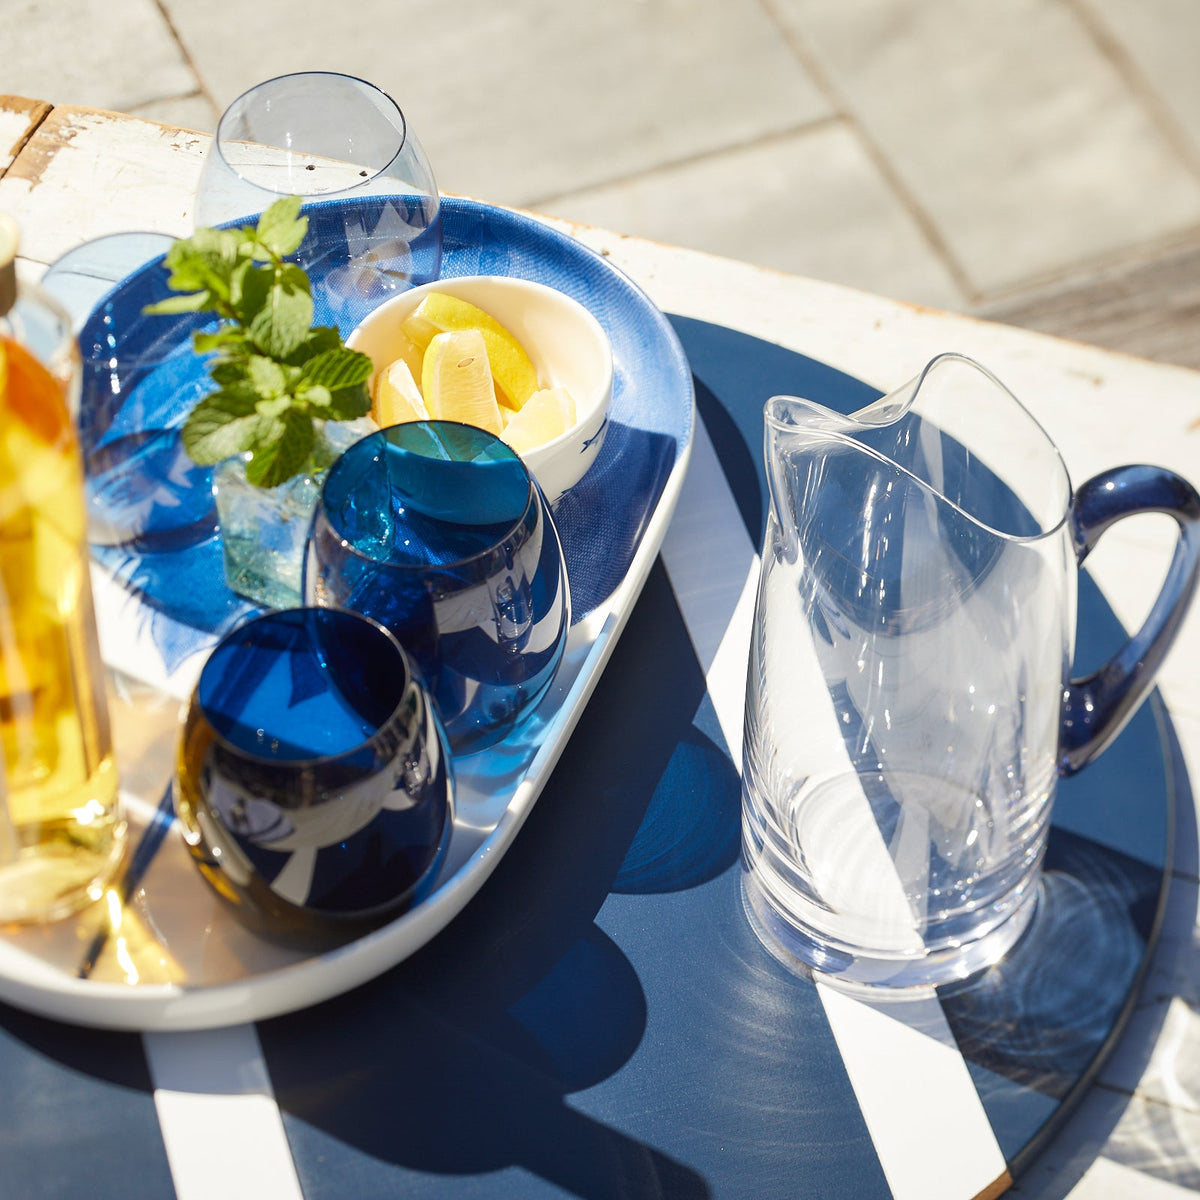 A tray of Caskata Les Nuages Blue Ombré Glasses Set of 4 and a bottle of liquid on a table.